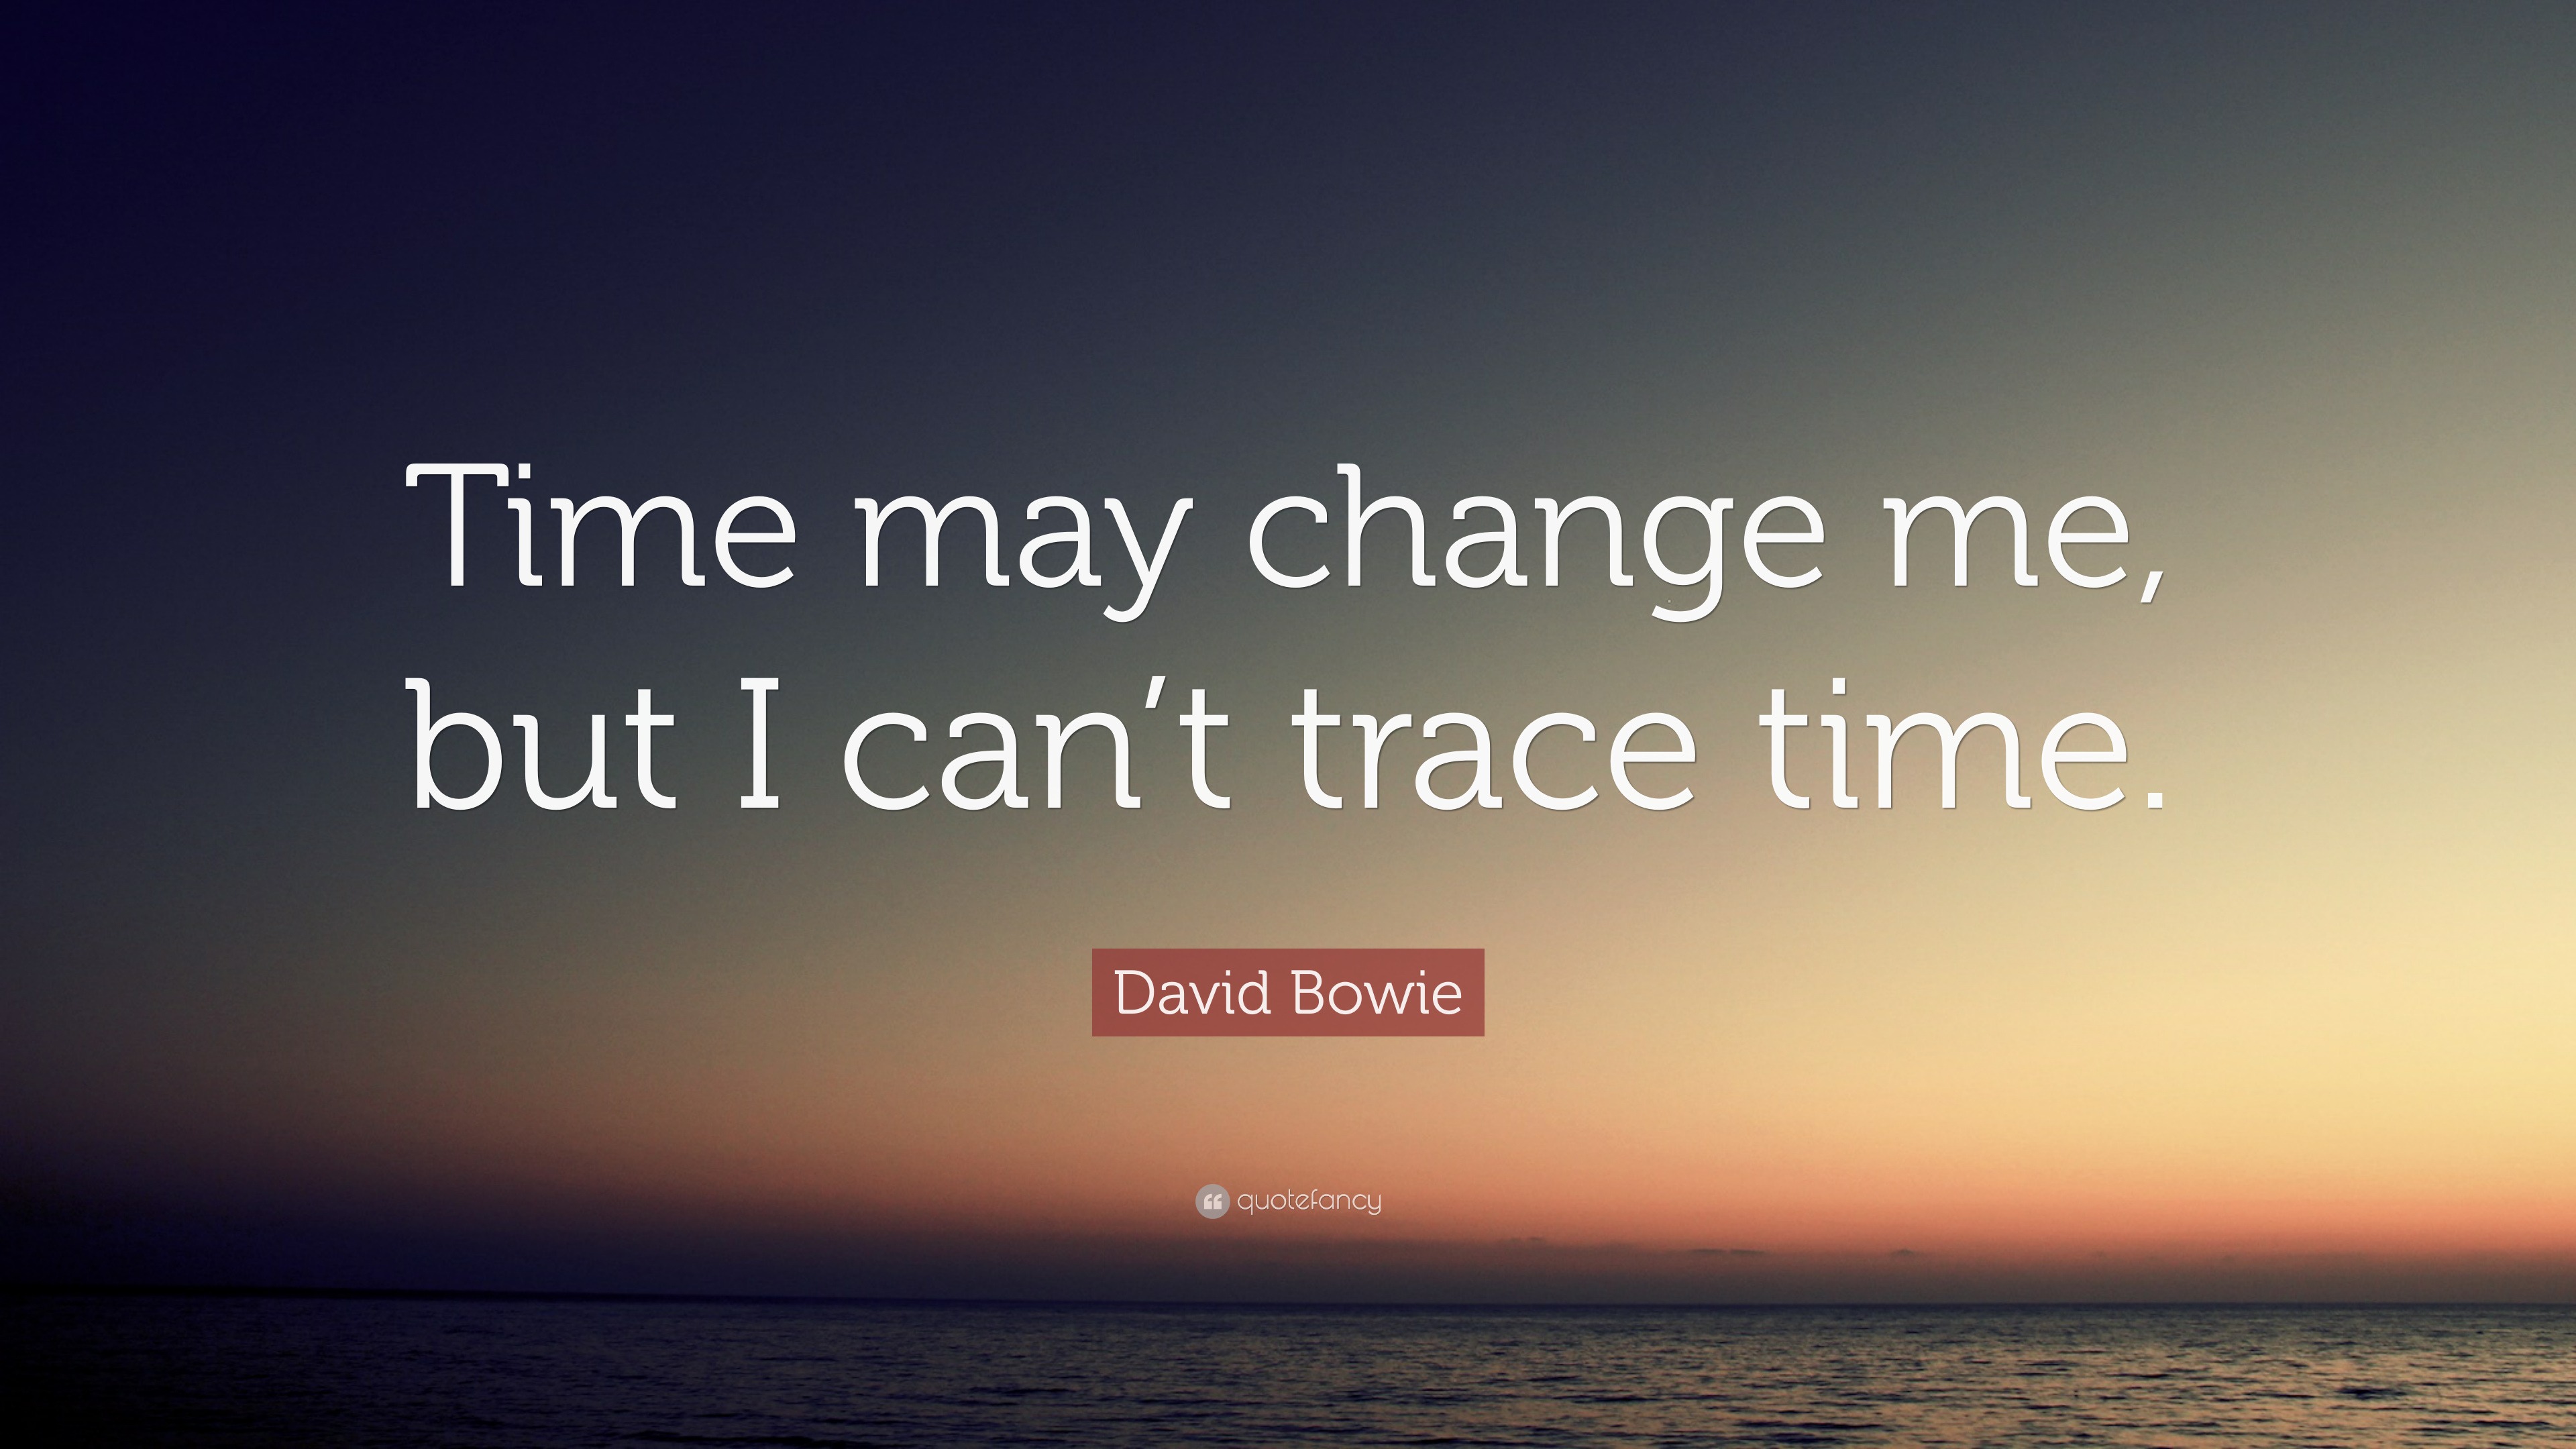 David Bowie Quote: “Time may me, but I